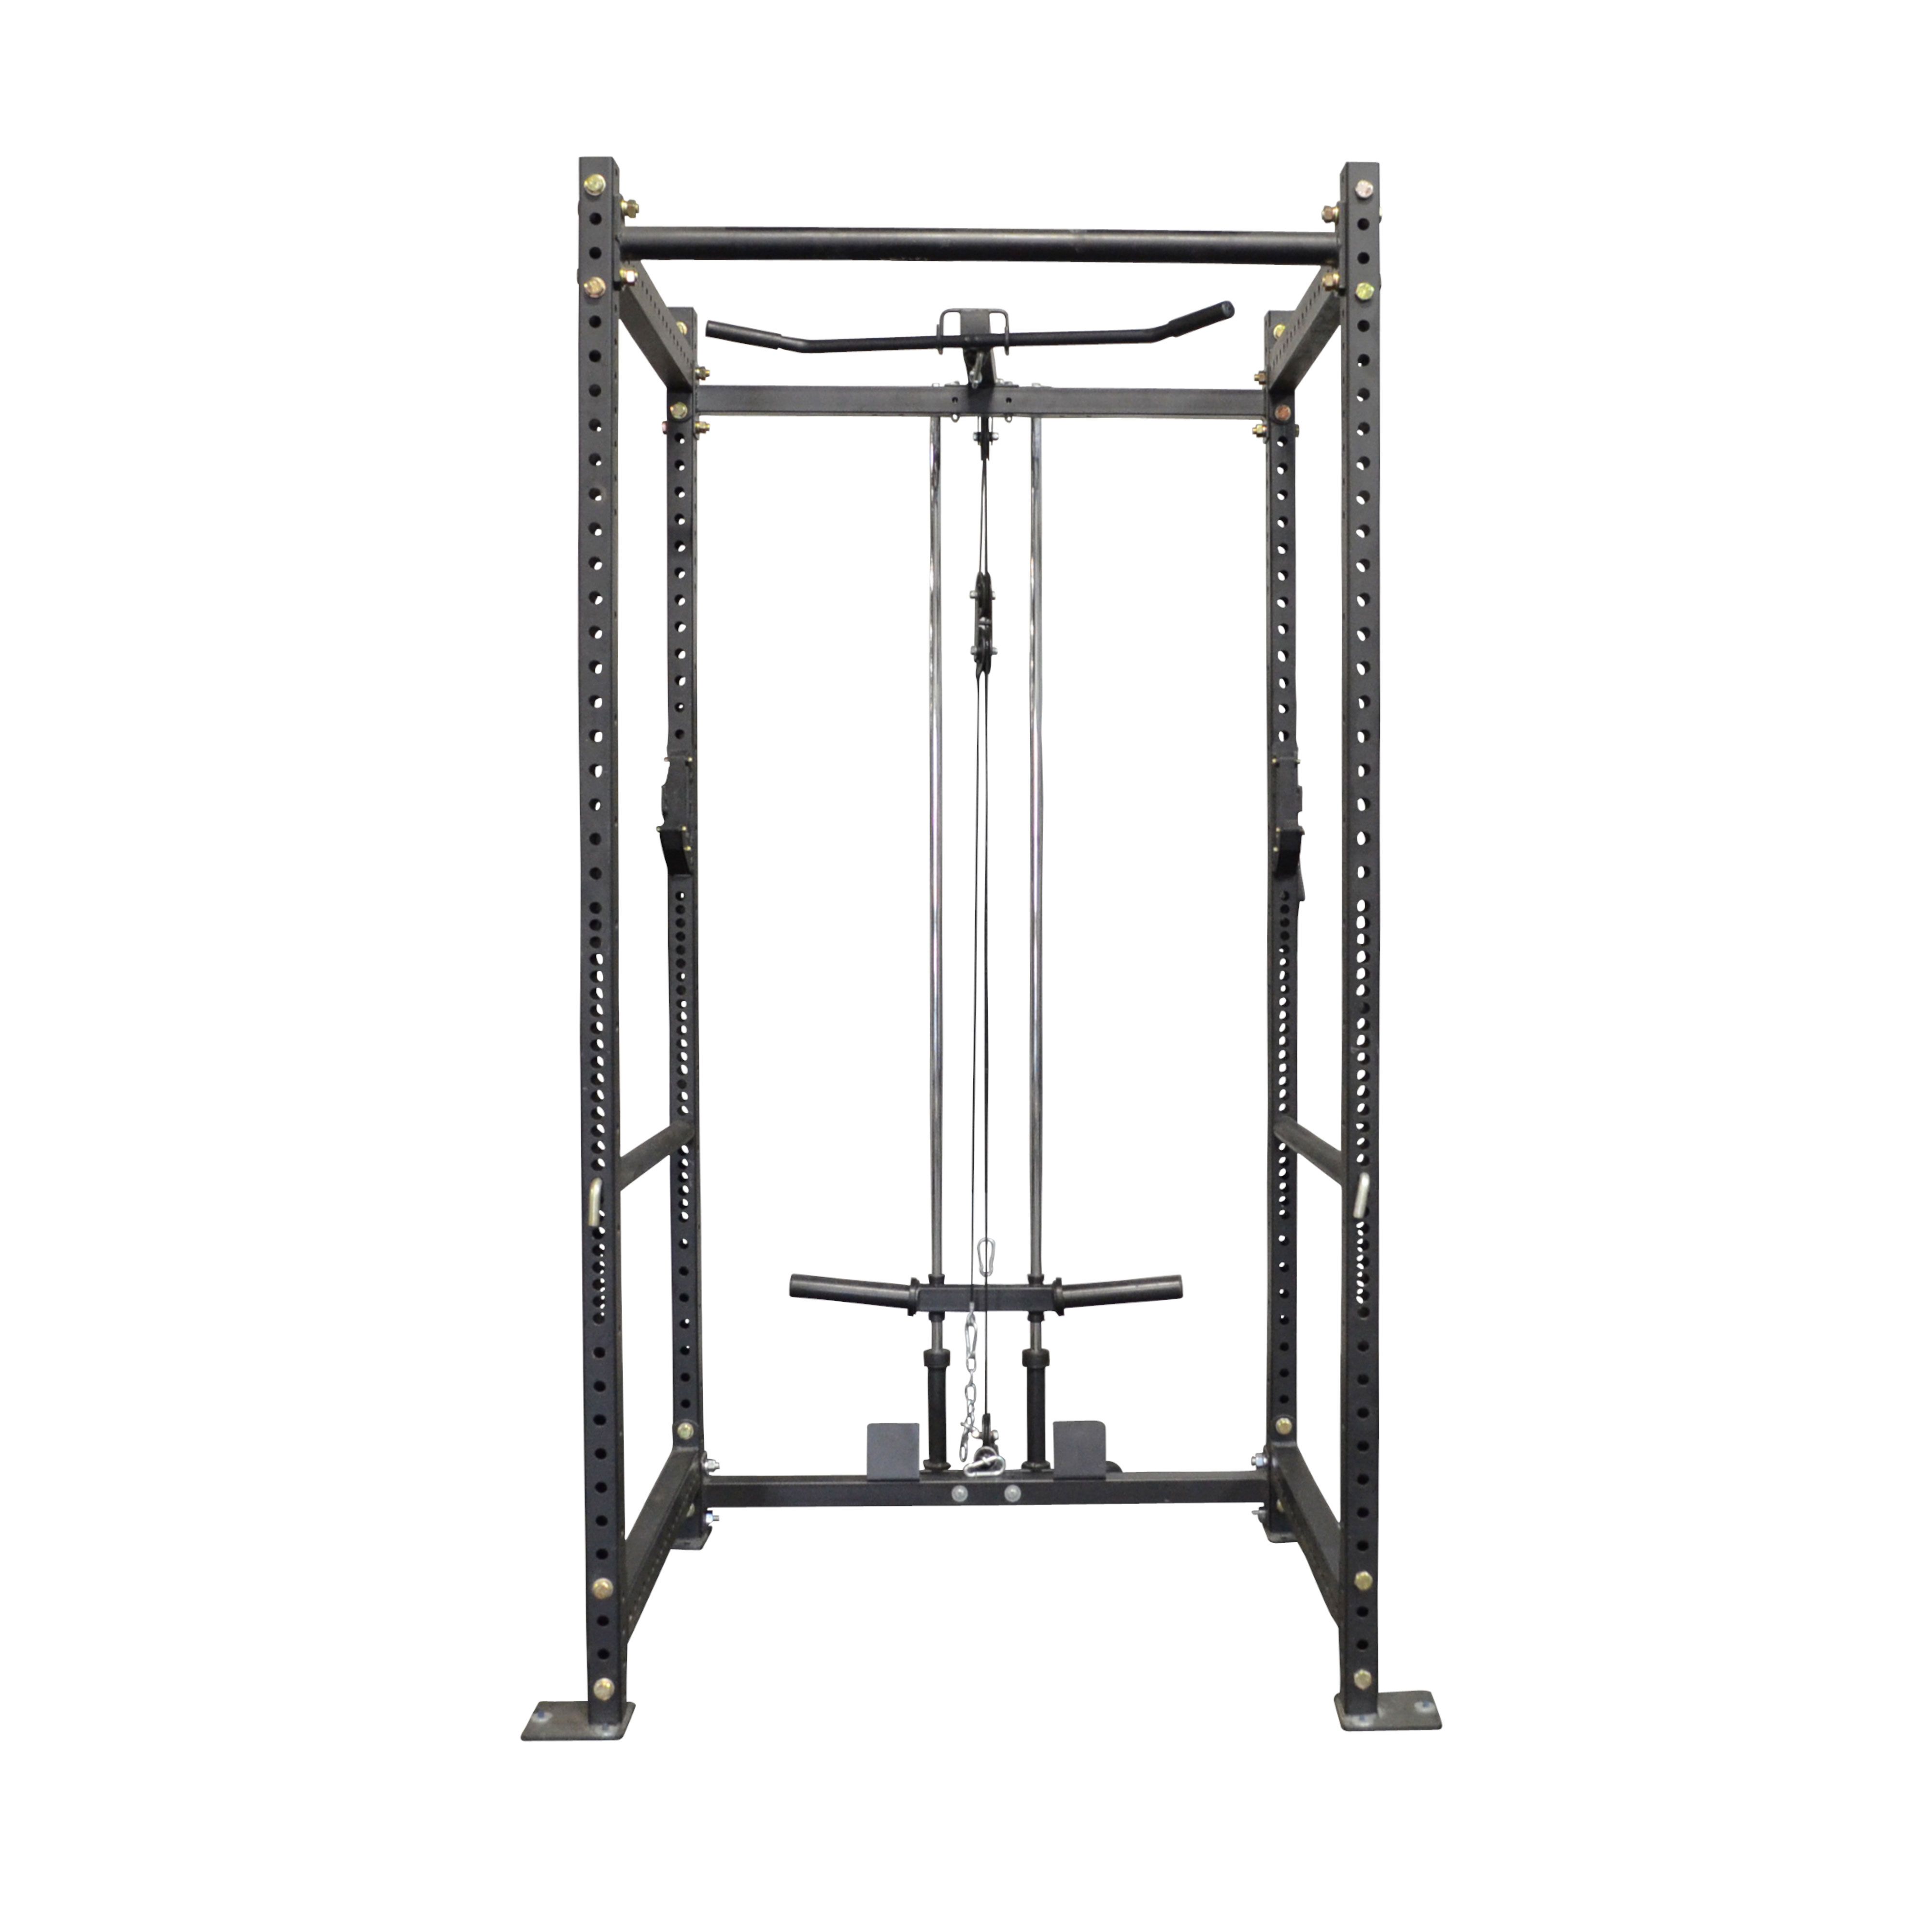 Come with J-Hooks and Other Cable Attachments Mikolo Power Cage Dip Bars T-Bar 1000LBS Power Rack with LAT Pull Down and 360° Landmine for Home Gym Weightlifting 2021 Version-Blue 